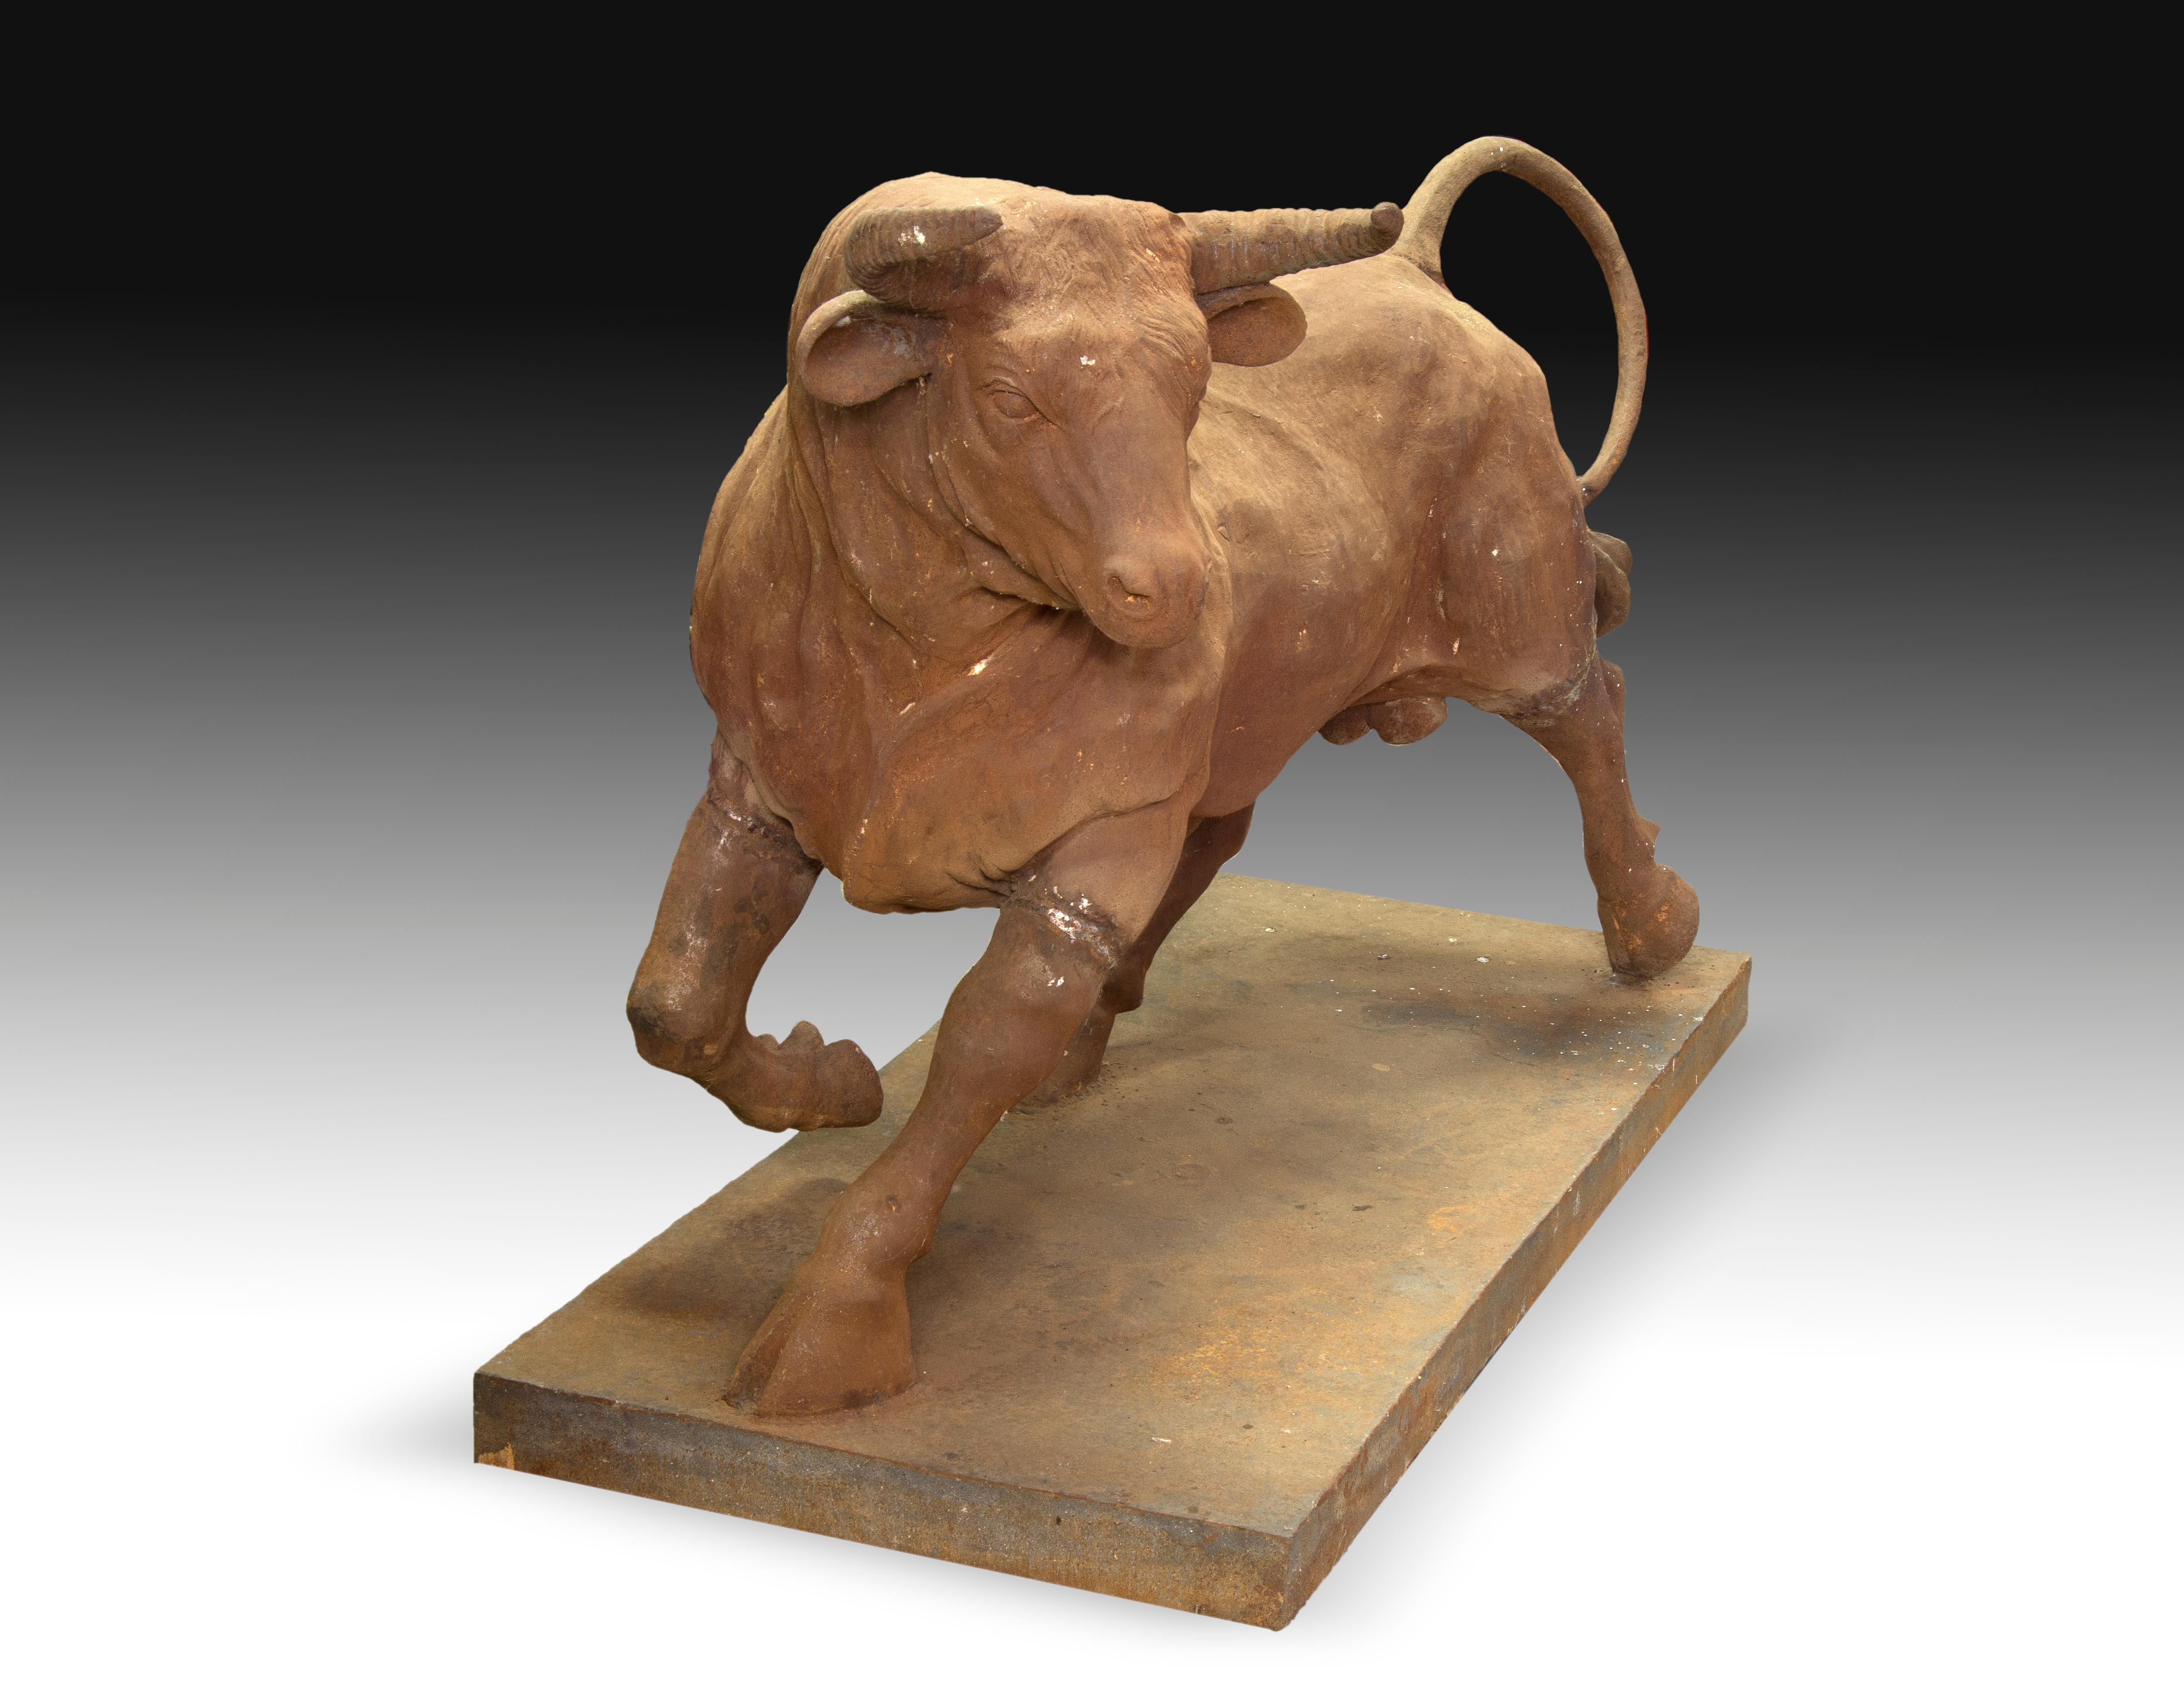 Iron sculpture located on a rectangular base that shows a fighting bull walking. They emphasize the naturalness in the posture, anatomy and details of the animal.
Size: 60 x 130 x 90 cms.